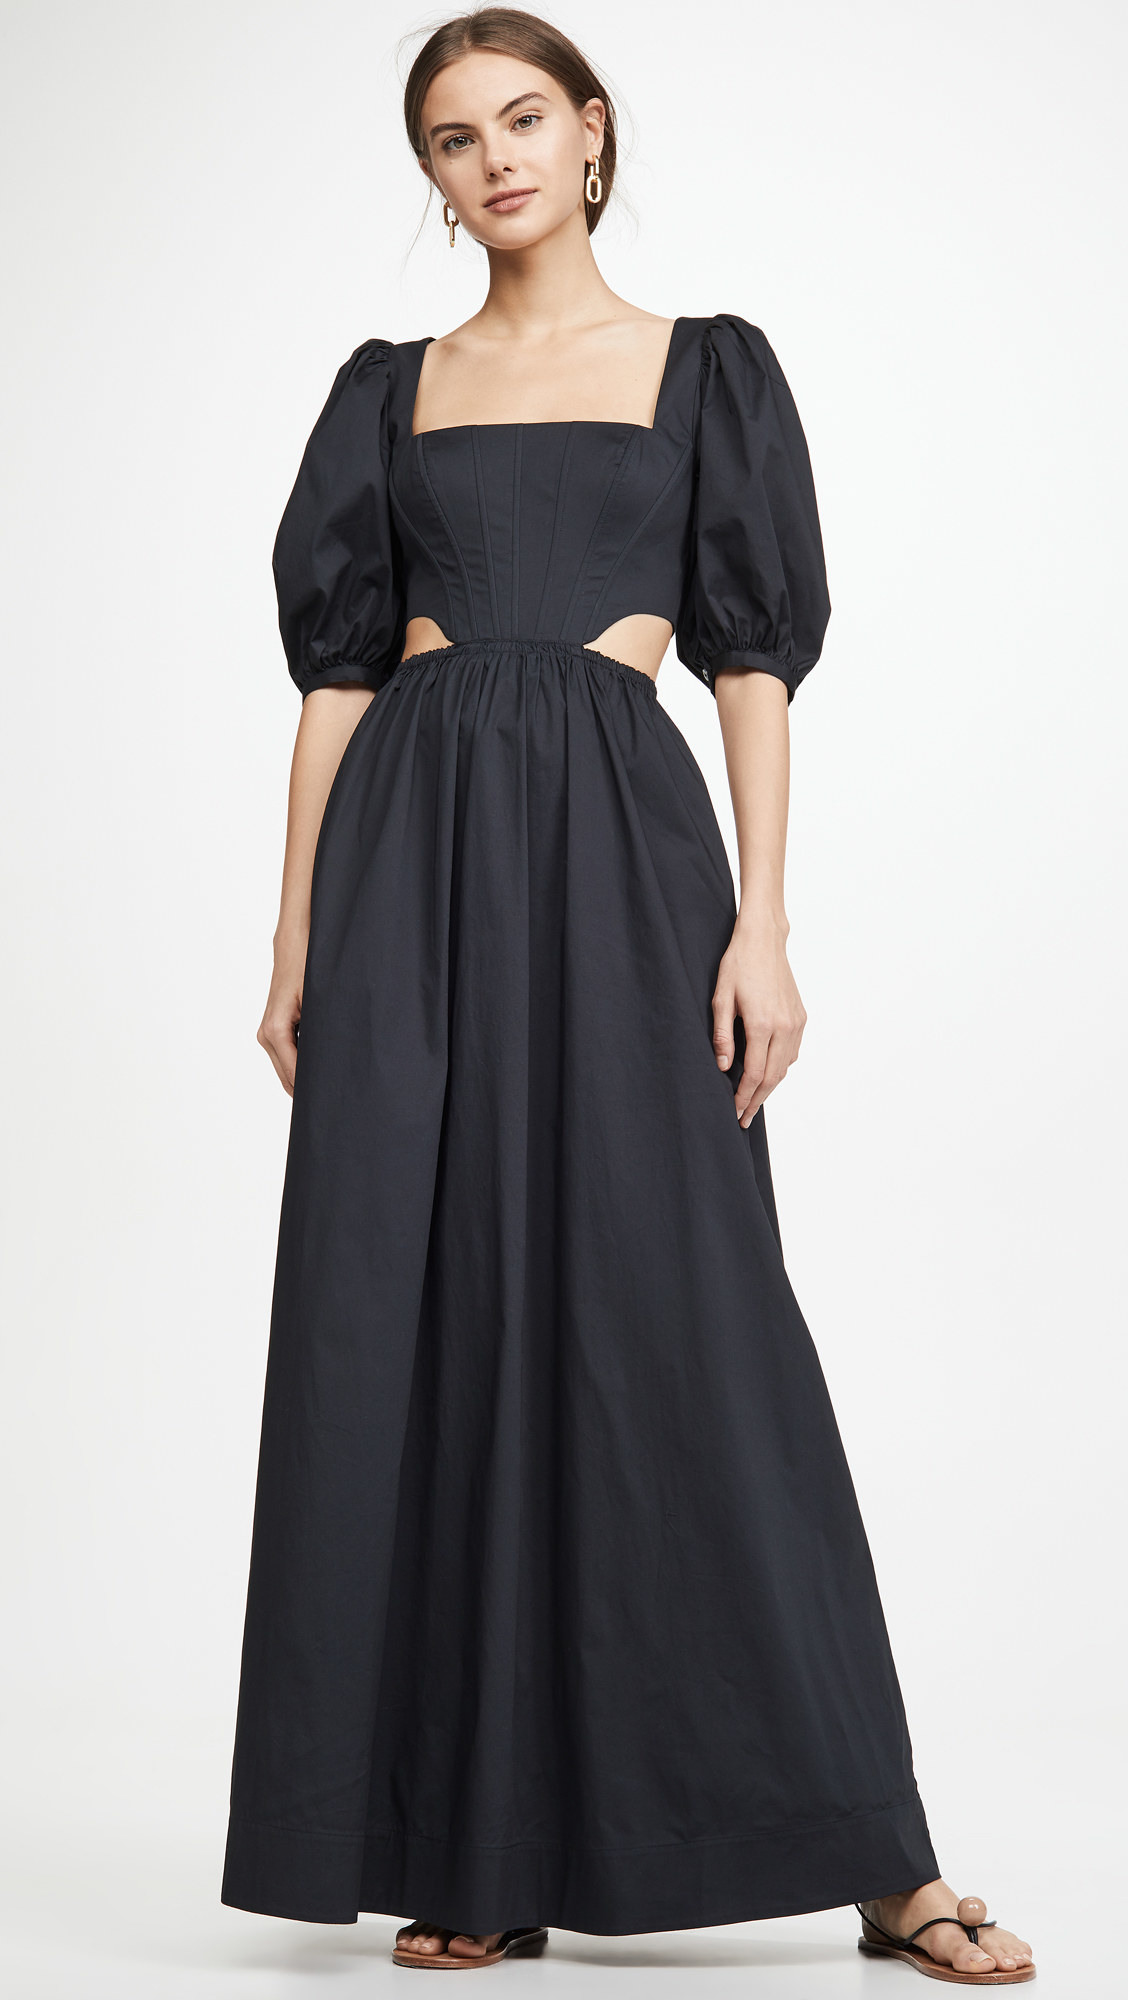 model in the puff short sleeve maxi dress with side cutouts and boning at the bodice